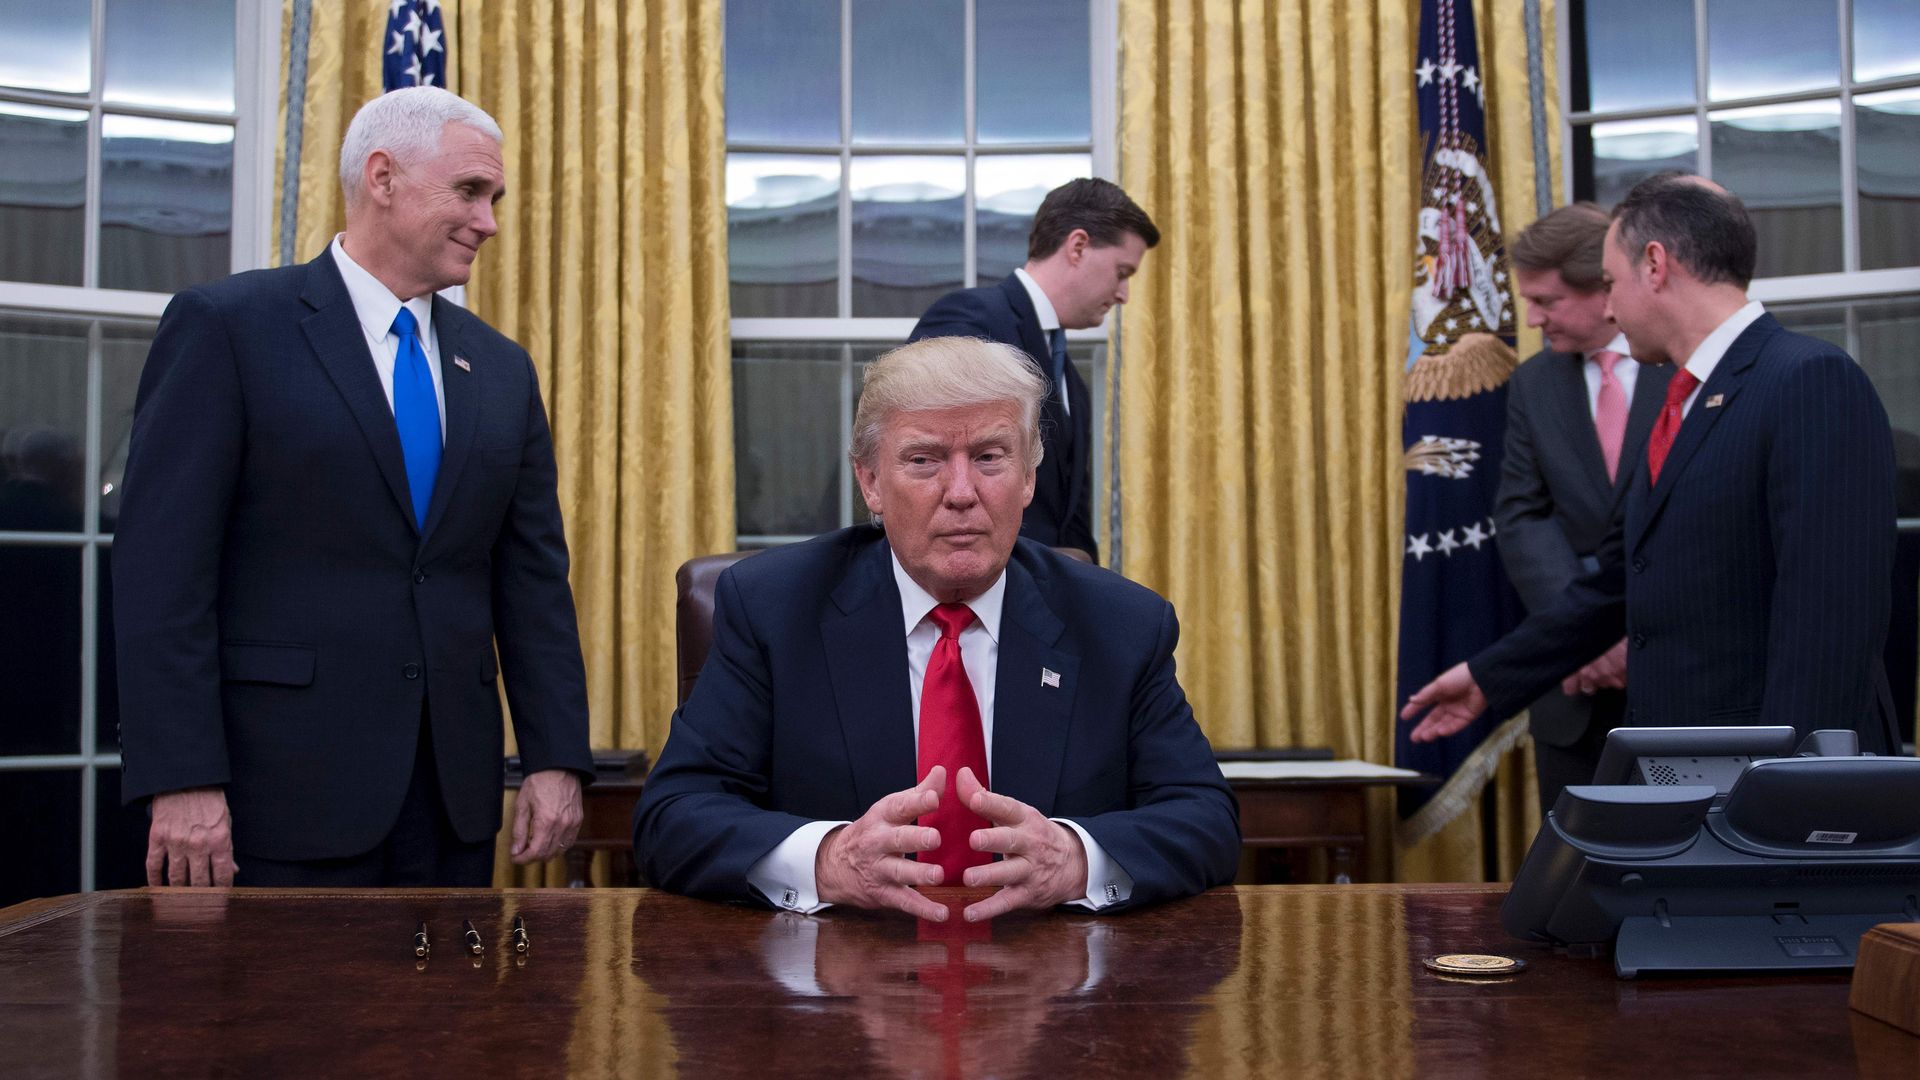 Donald Trump sits at his desk as his staff works around him